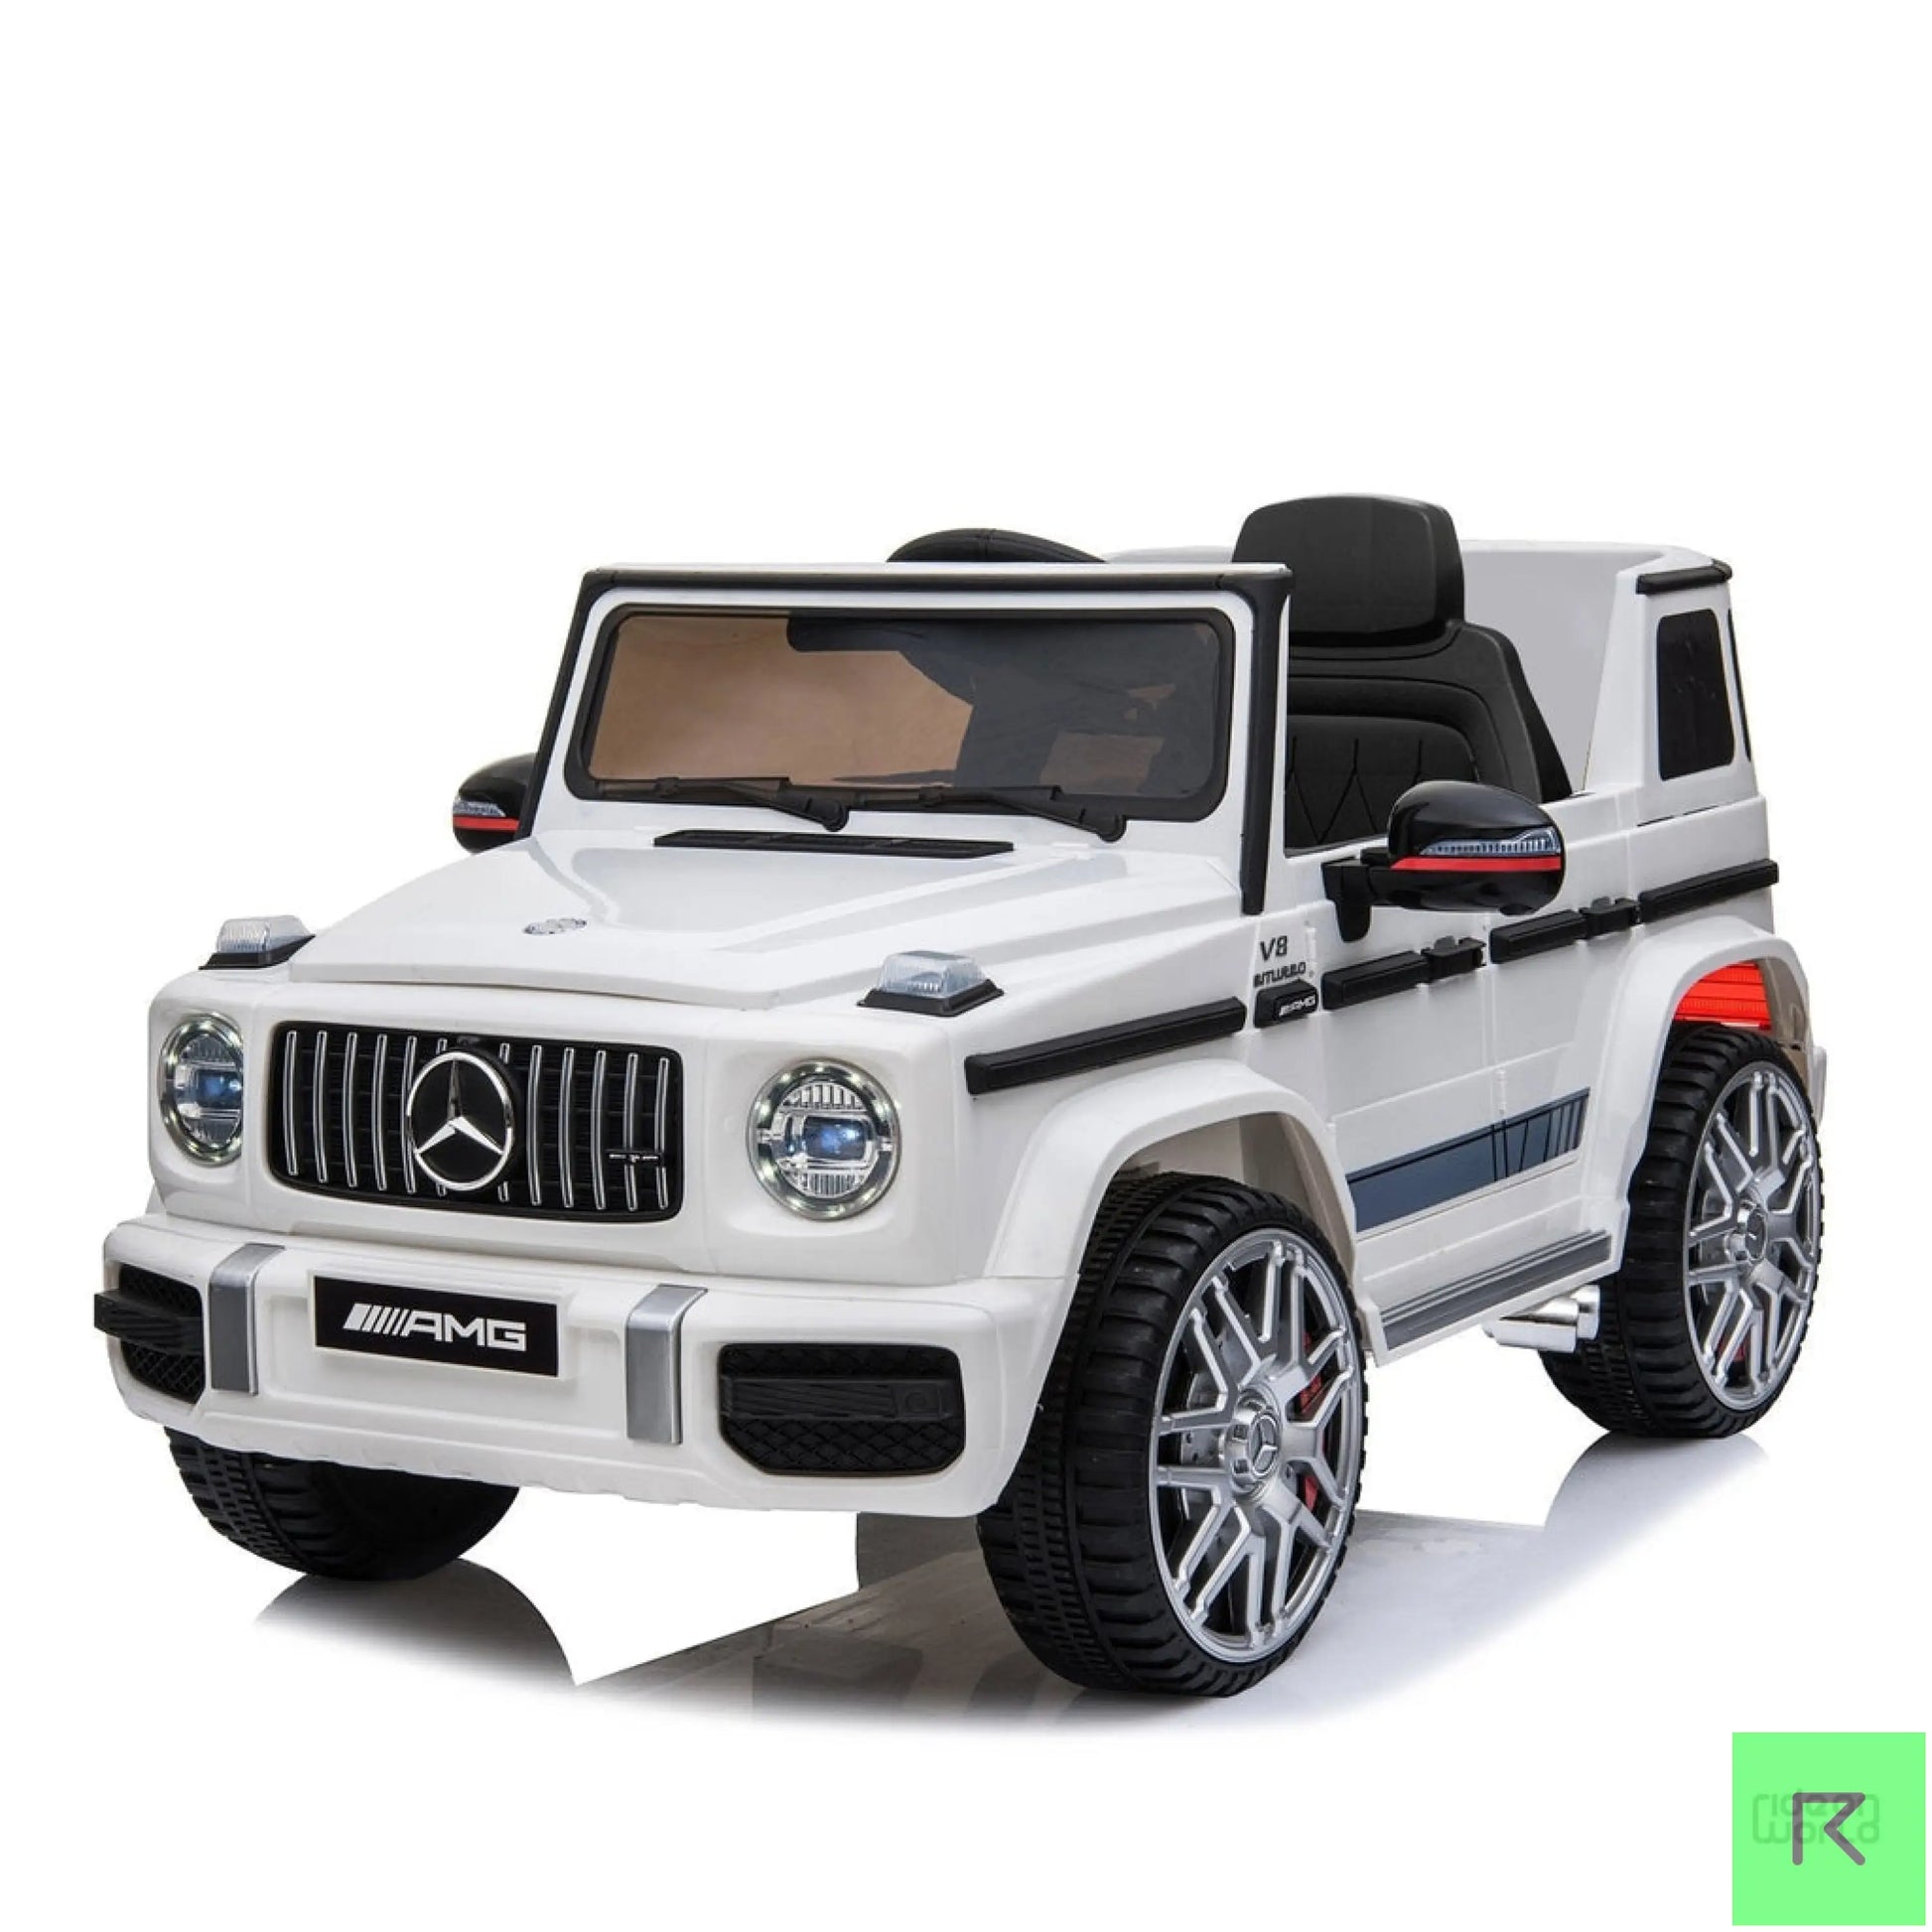 MERCEDES BENZ WHITE AMG G63 Licensed Kids Ride On Electric Car Remote Control - White